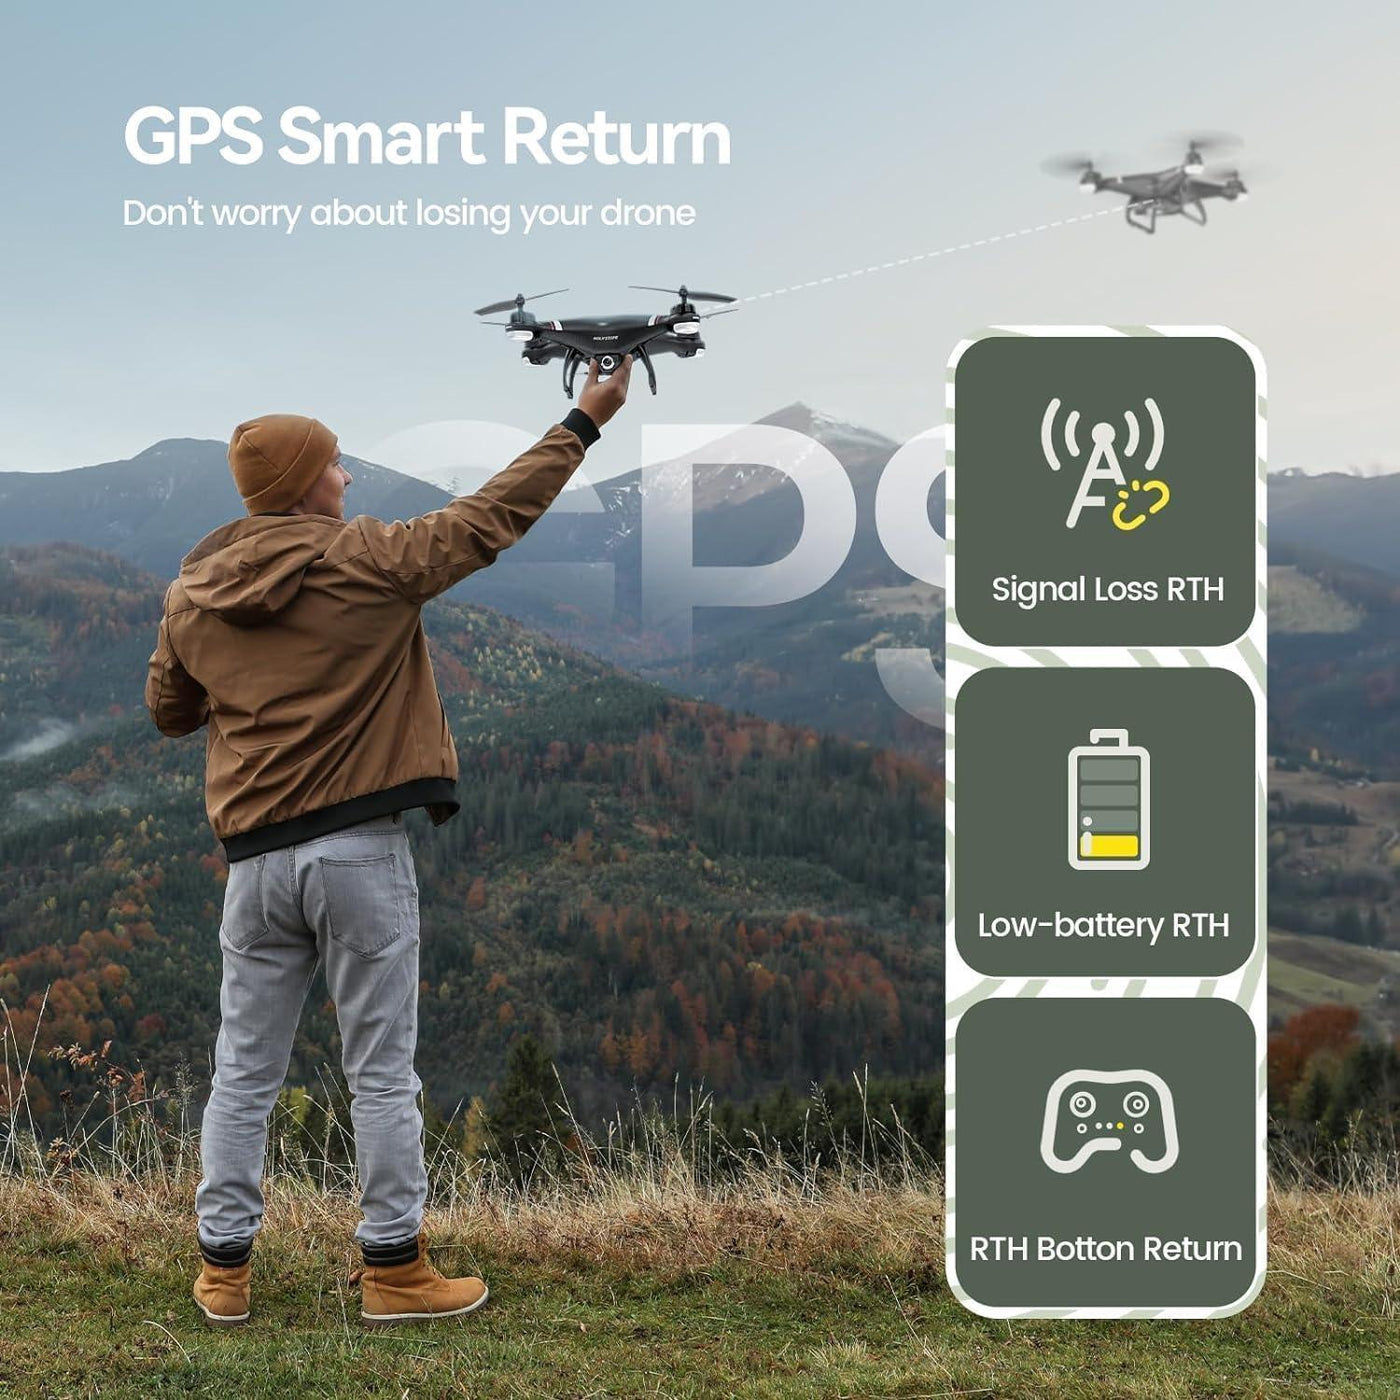 Holy Stone HS110G GPS FPV Drone with 2K HD Live Video / 2 Batteries - Massive Discounts